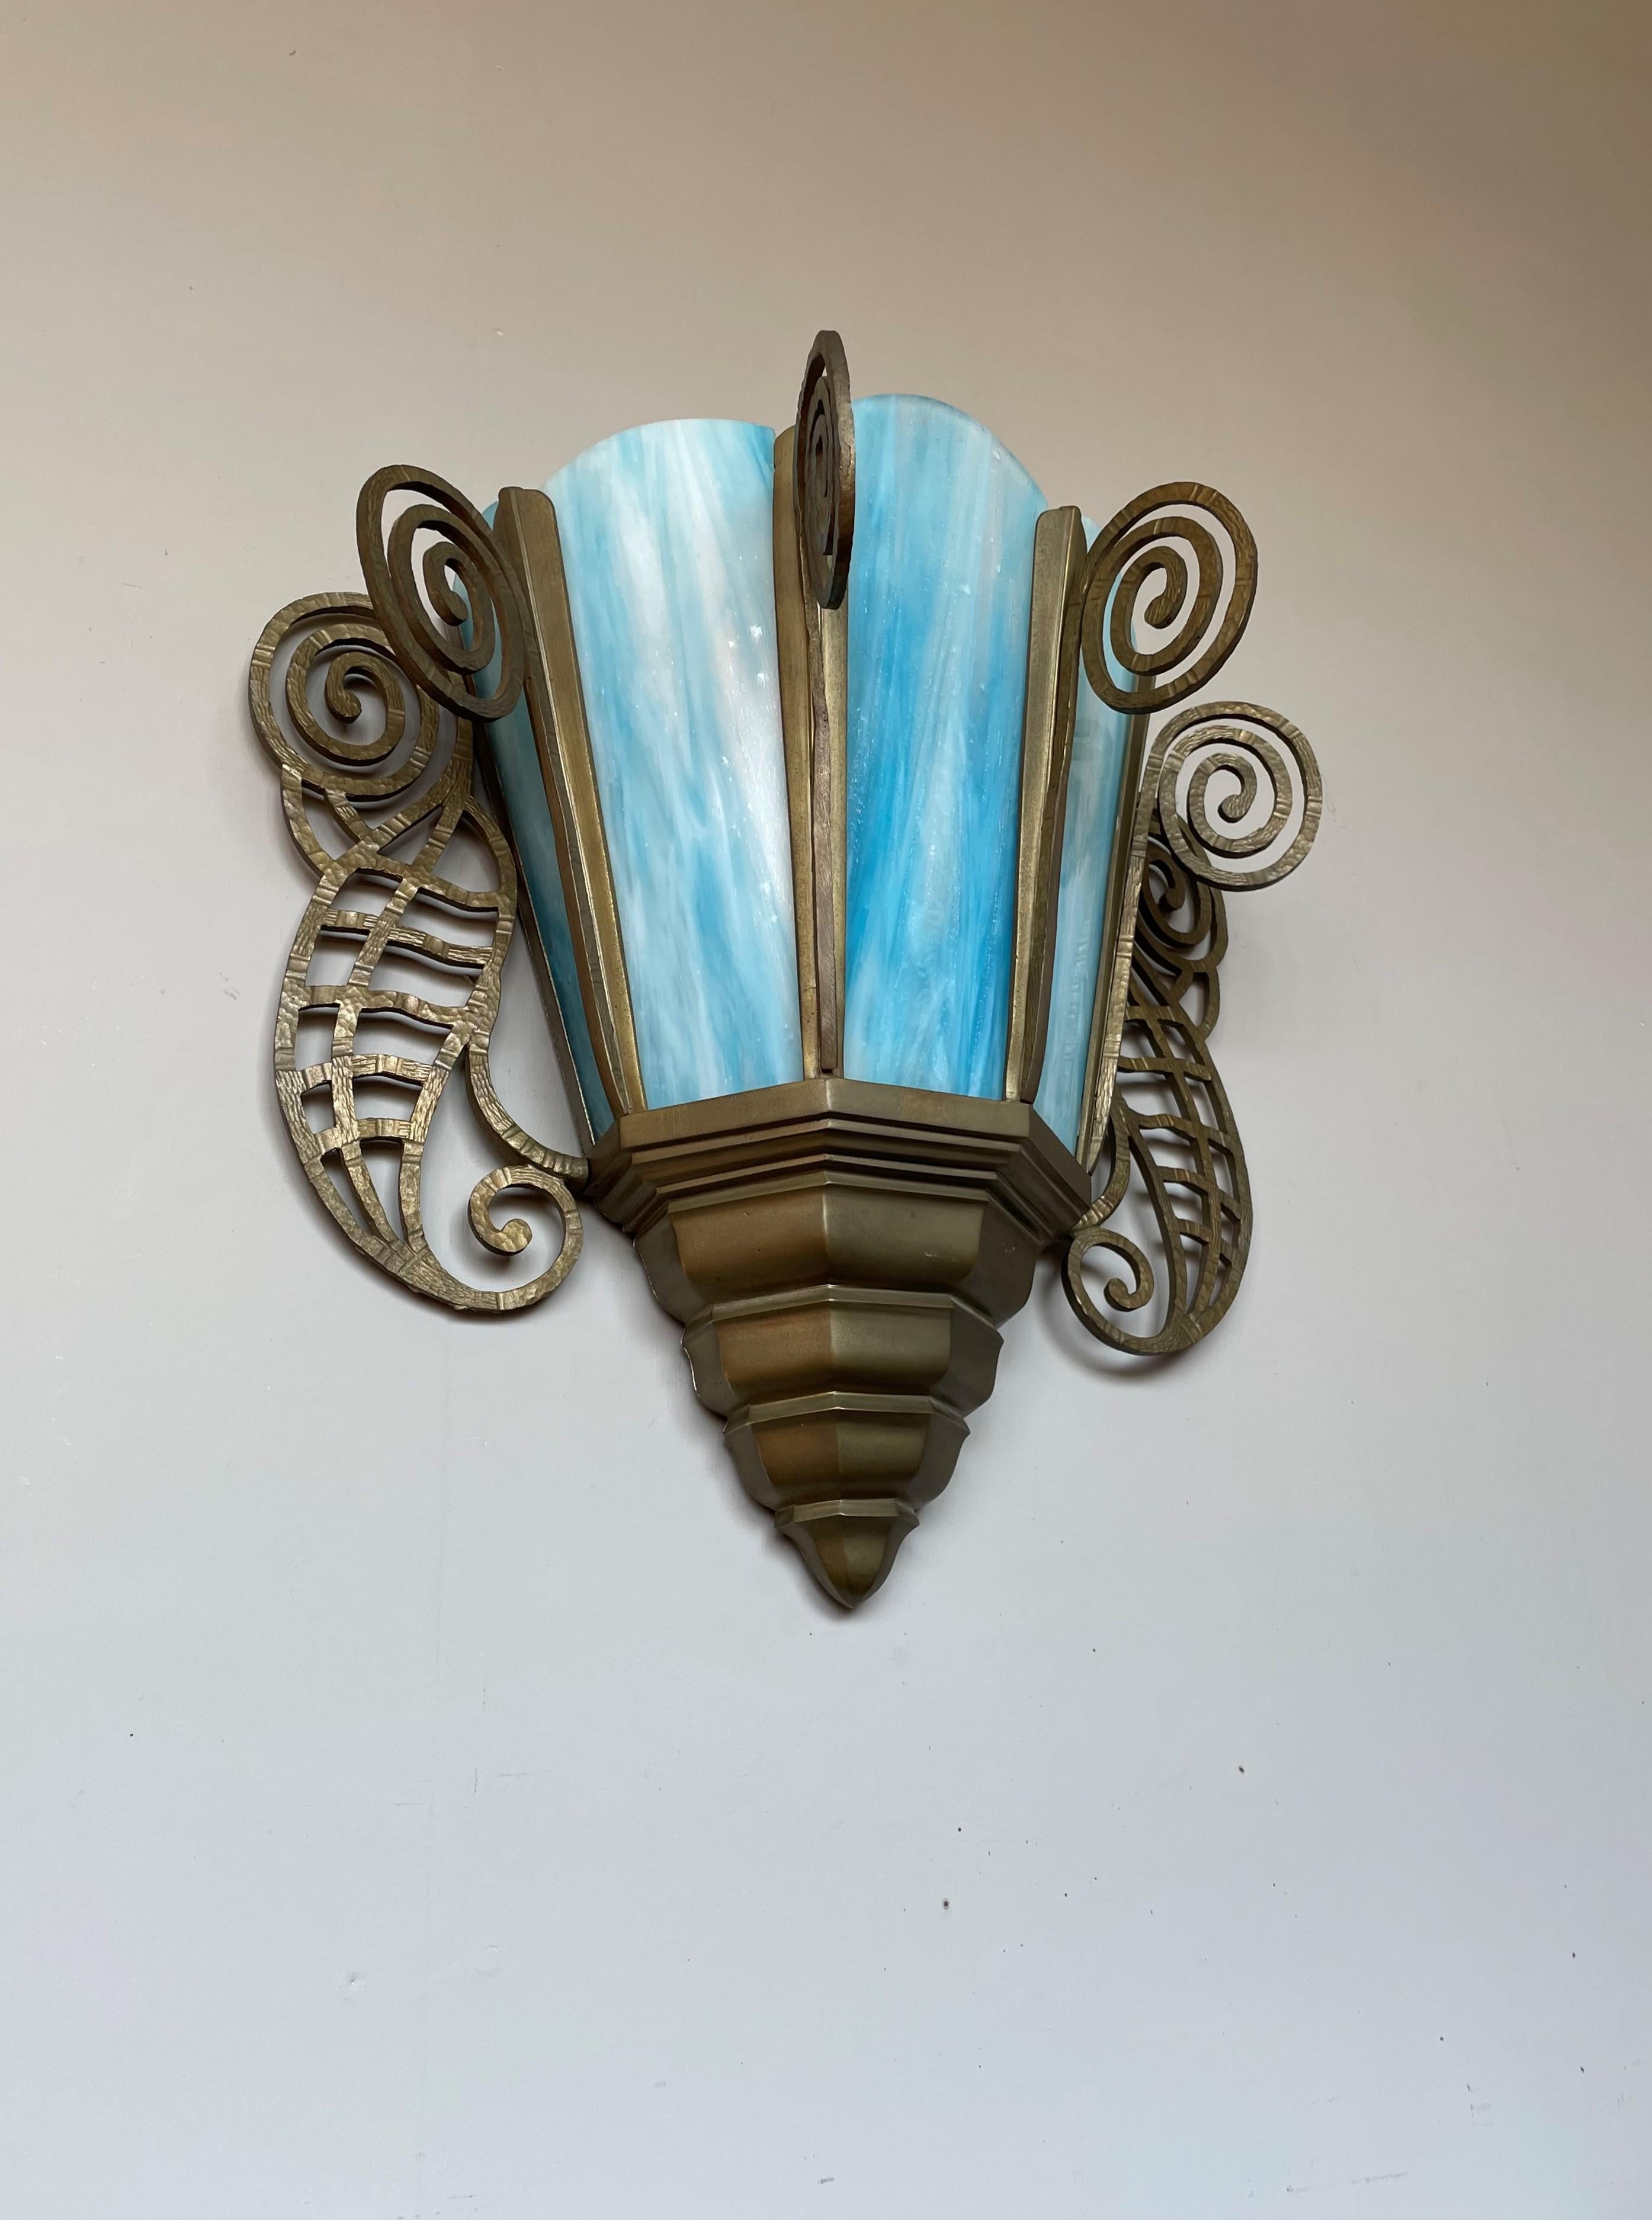 Wonderfully stylish and aesthetically pleasing sconce, easy to wall mount.

This handcrafted, semi antique sconce for many reasons is a joy to own and look at. Hand-crafted pieces always have an extra quality to them and we believe it is because of